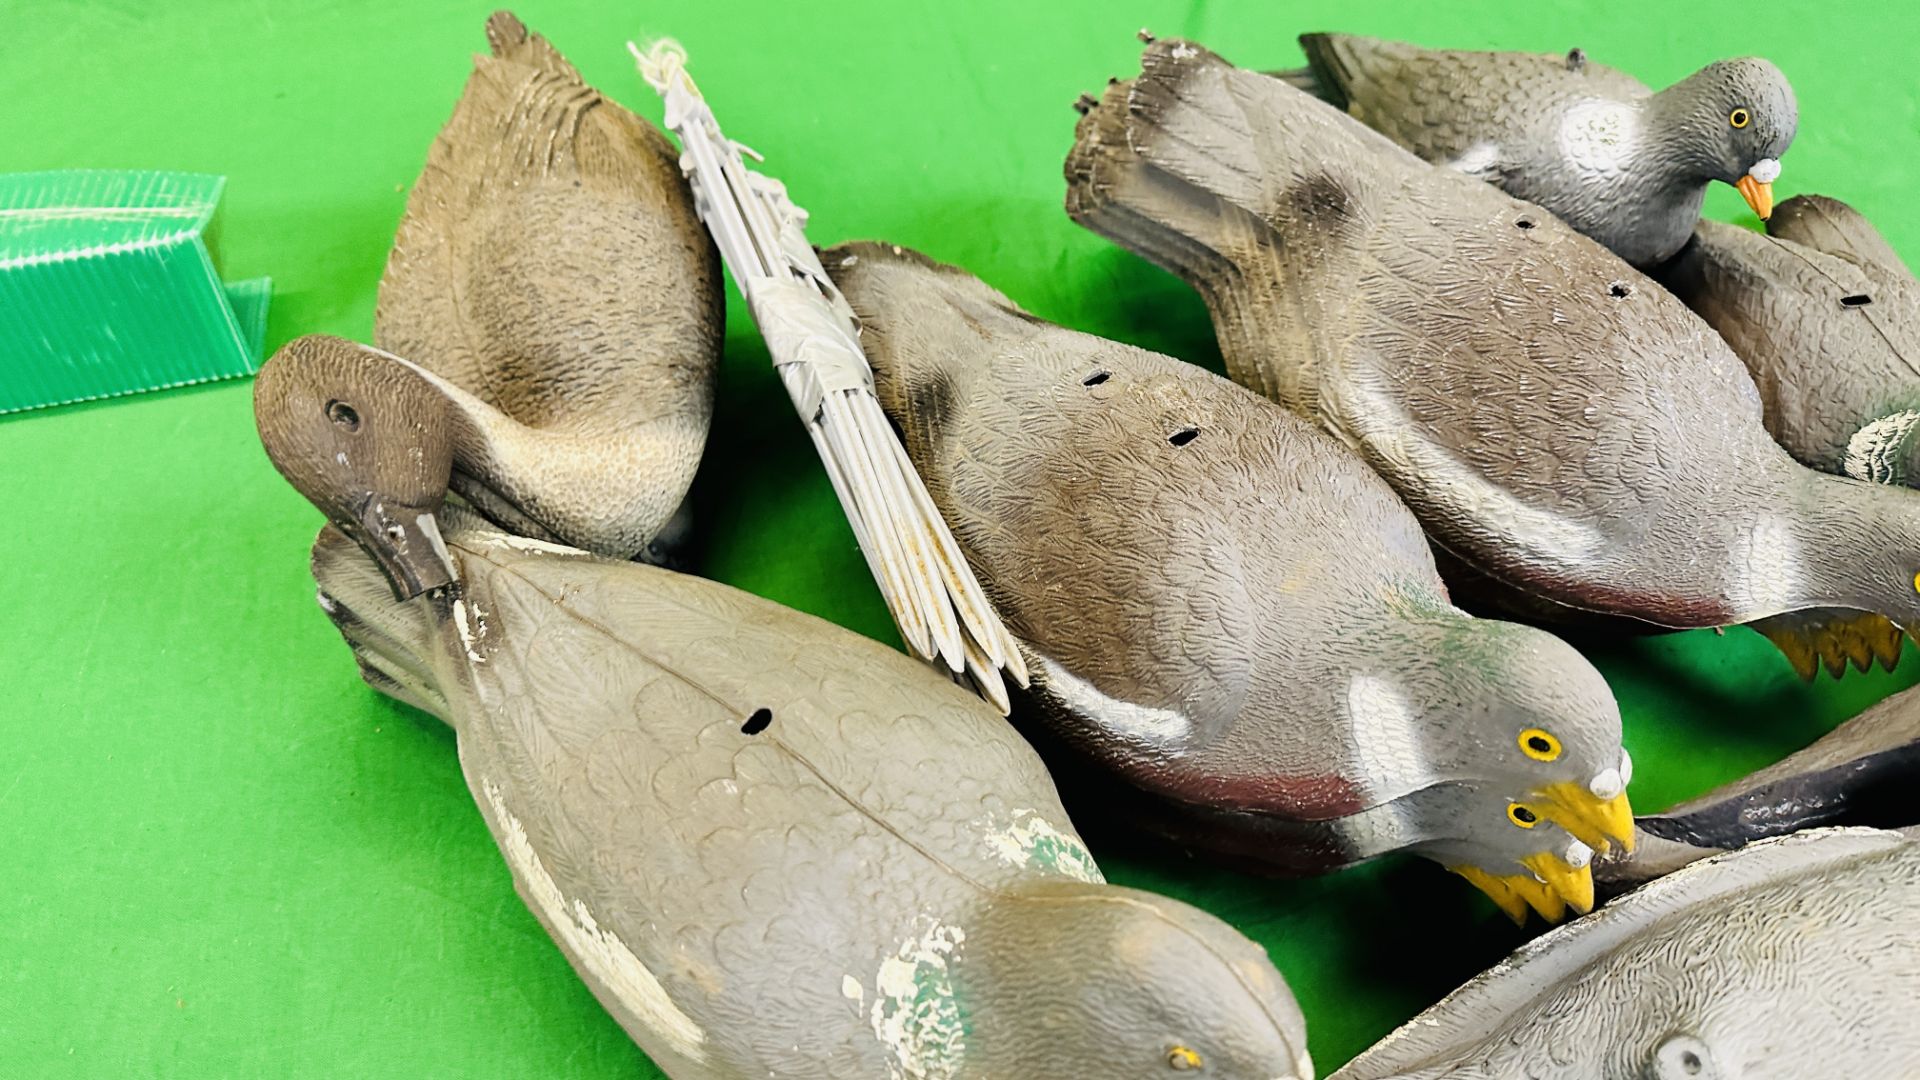 TWO BOXES OF VARIOUS PIGEON DECOYS AND DECOY DUCK. - Image 9 of 9